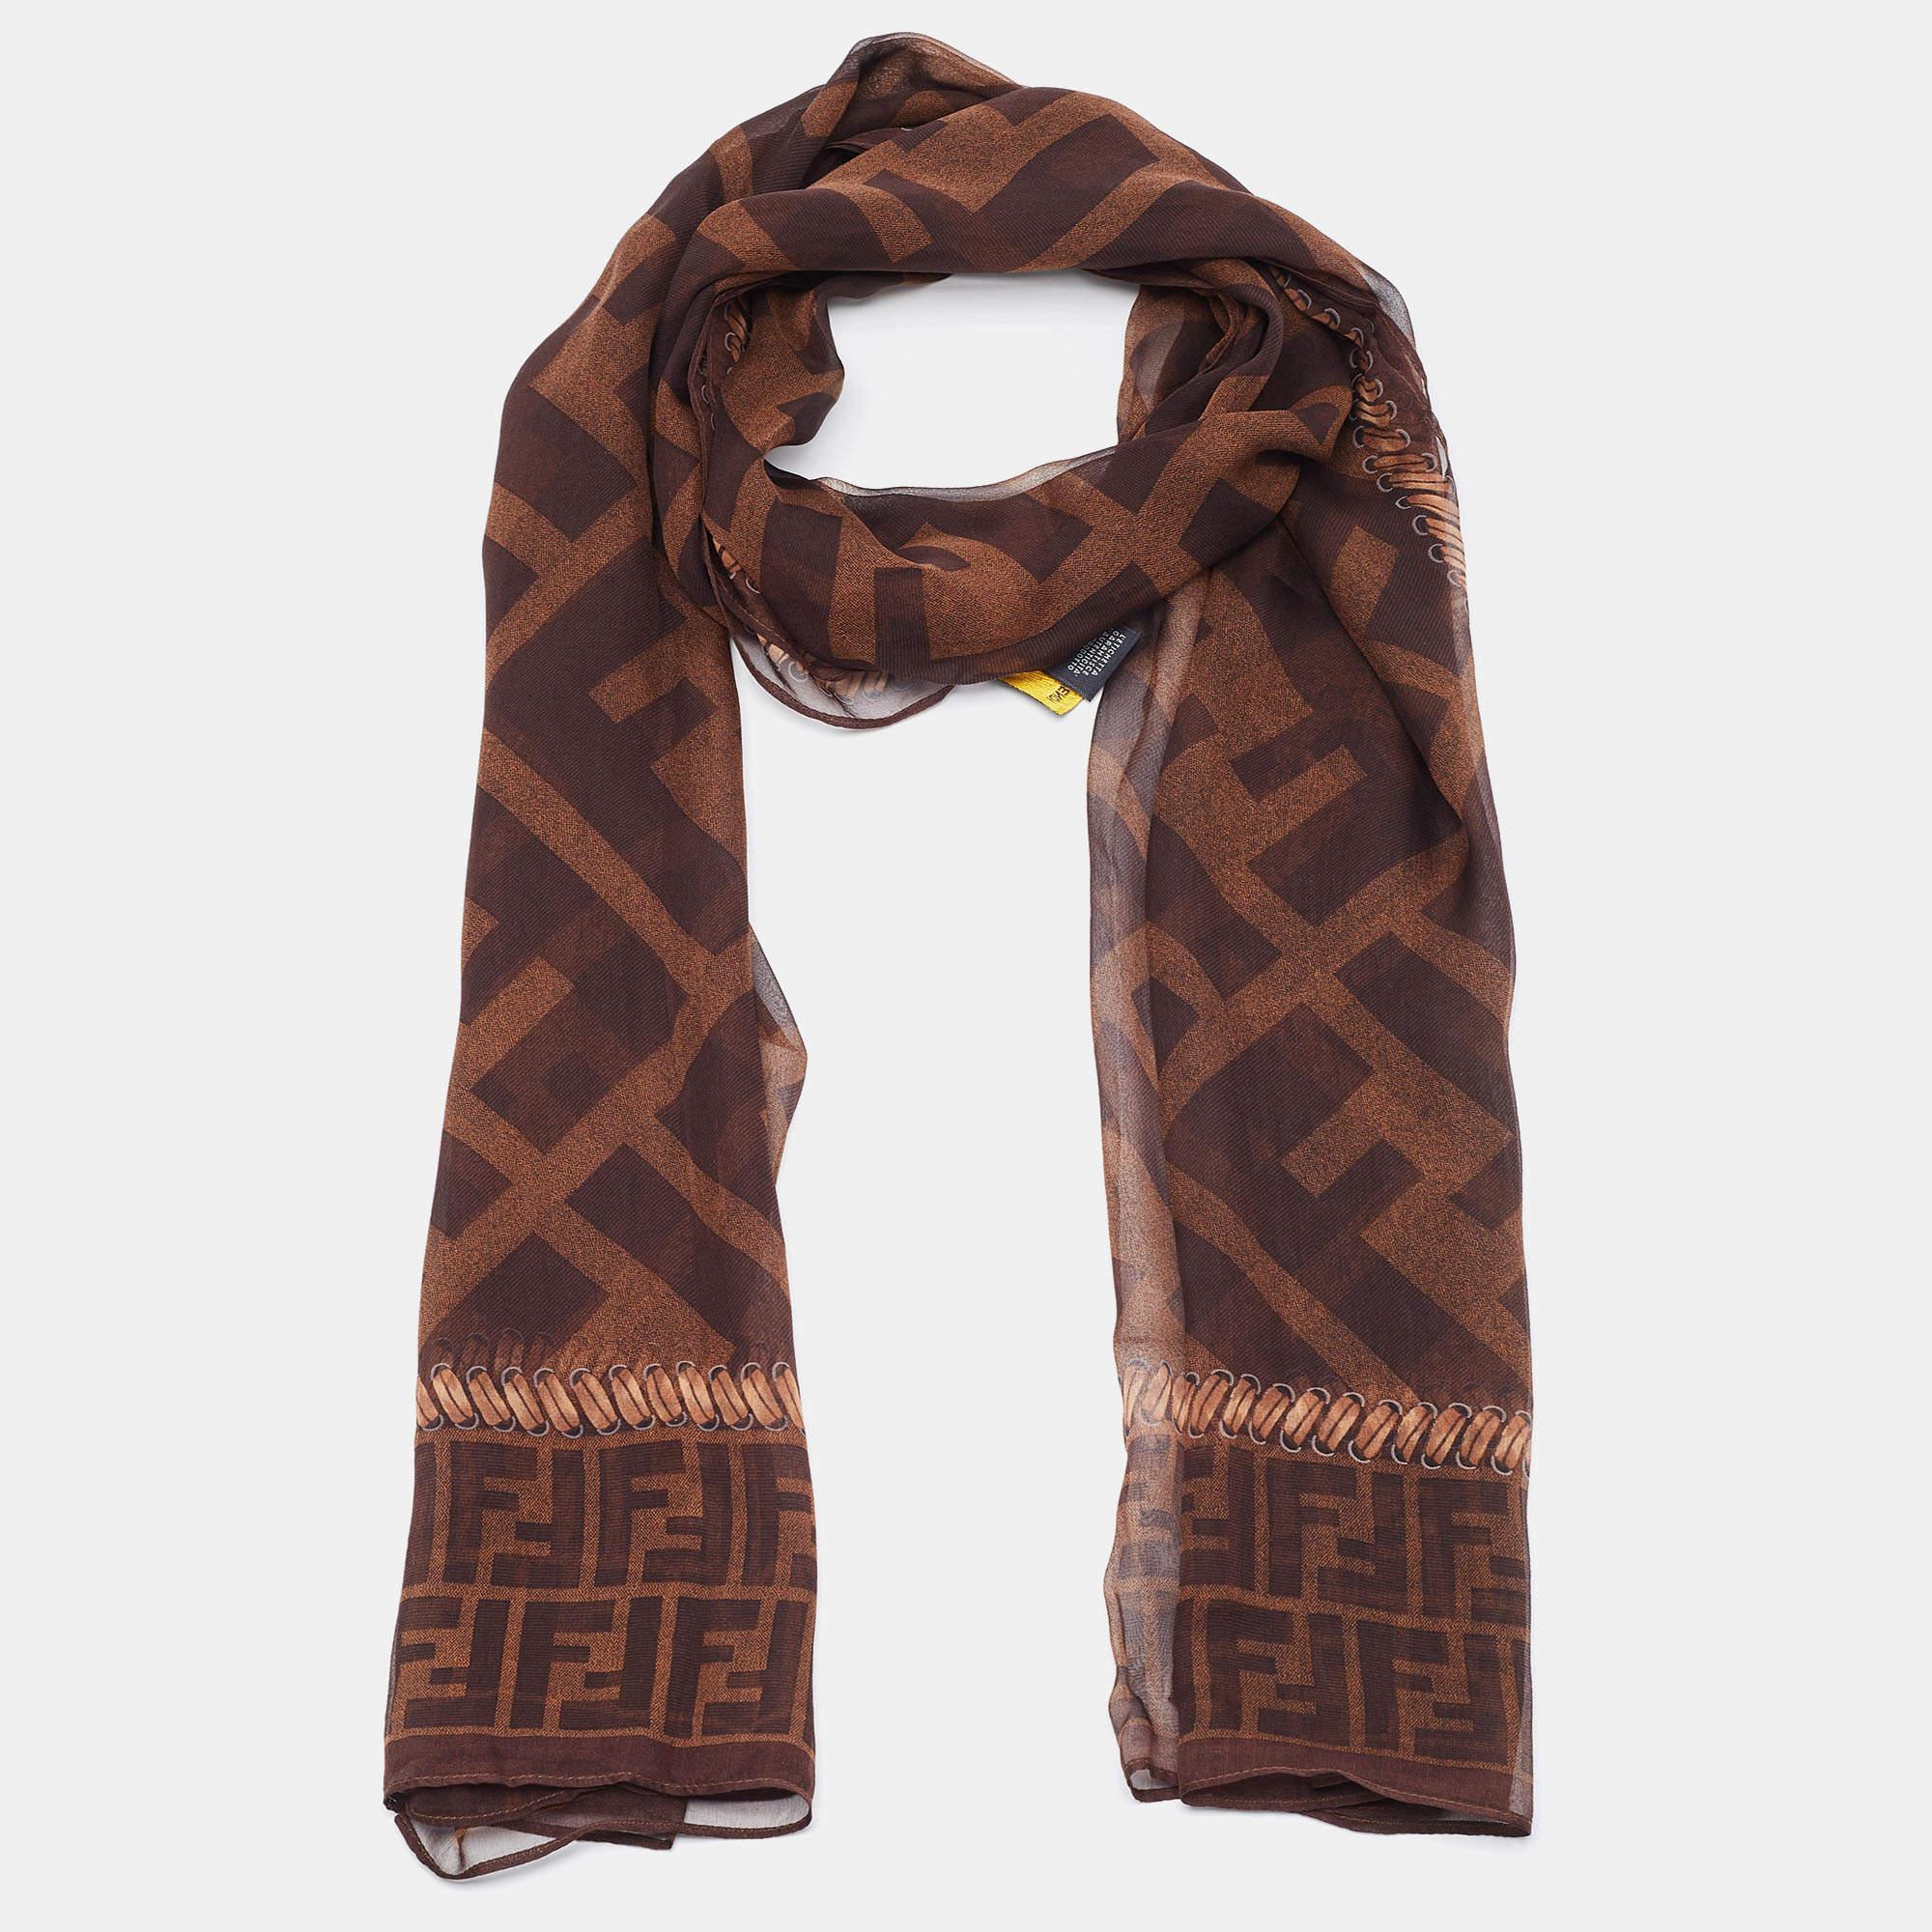 Pick this Fendi scarf for an instantly chic update. The scarf is made from silk and cut to a length that allows you to comfortably wrap it around your neck. The design involves signature prints and neatly hemmed edges.

